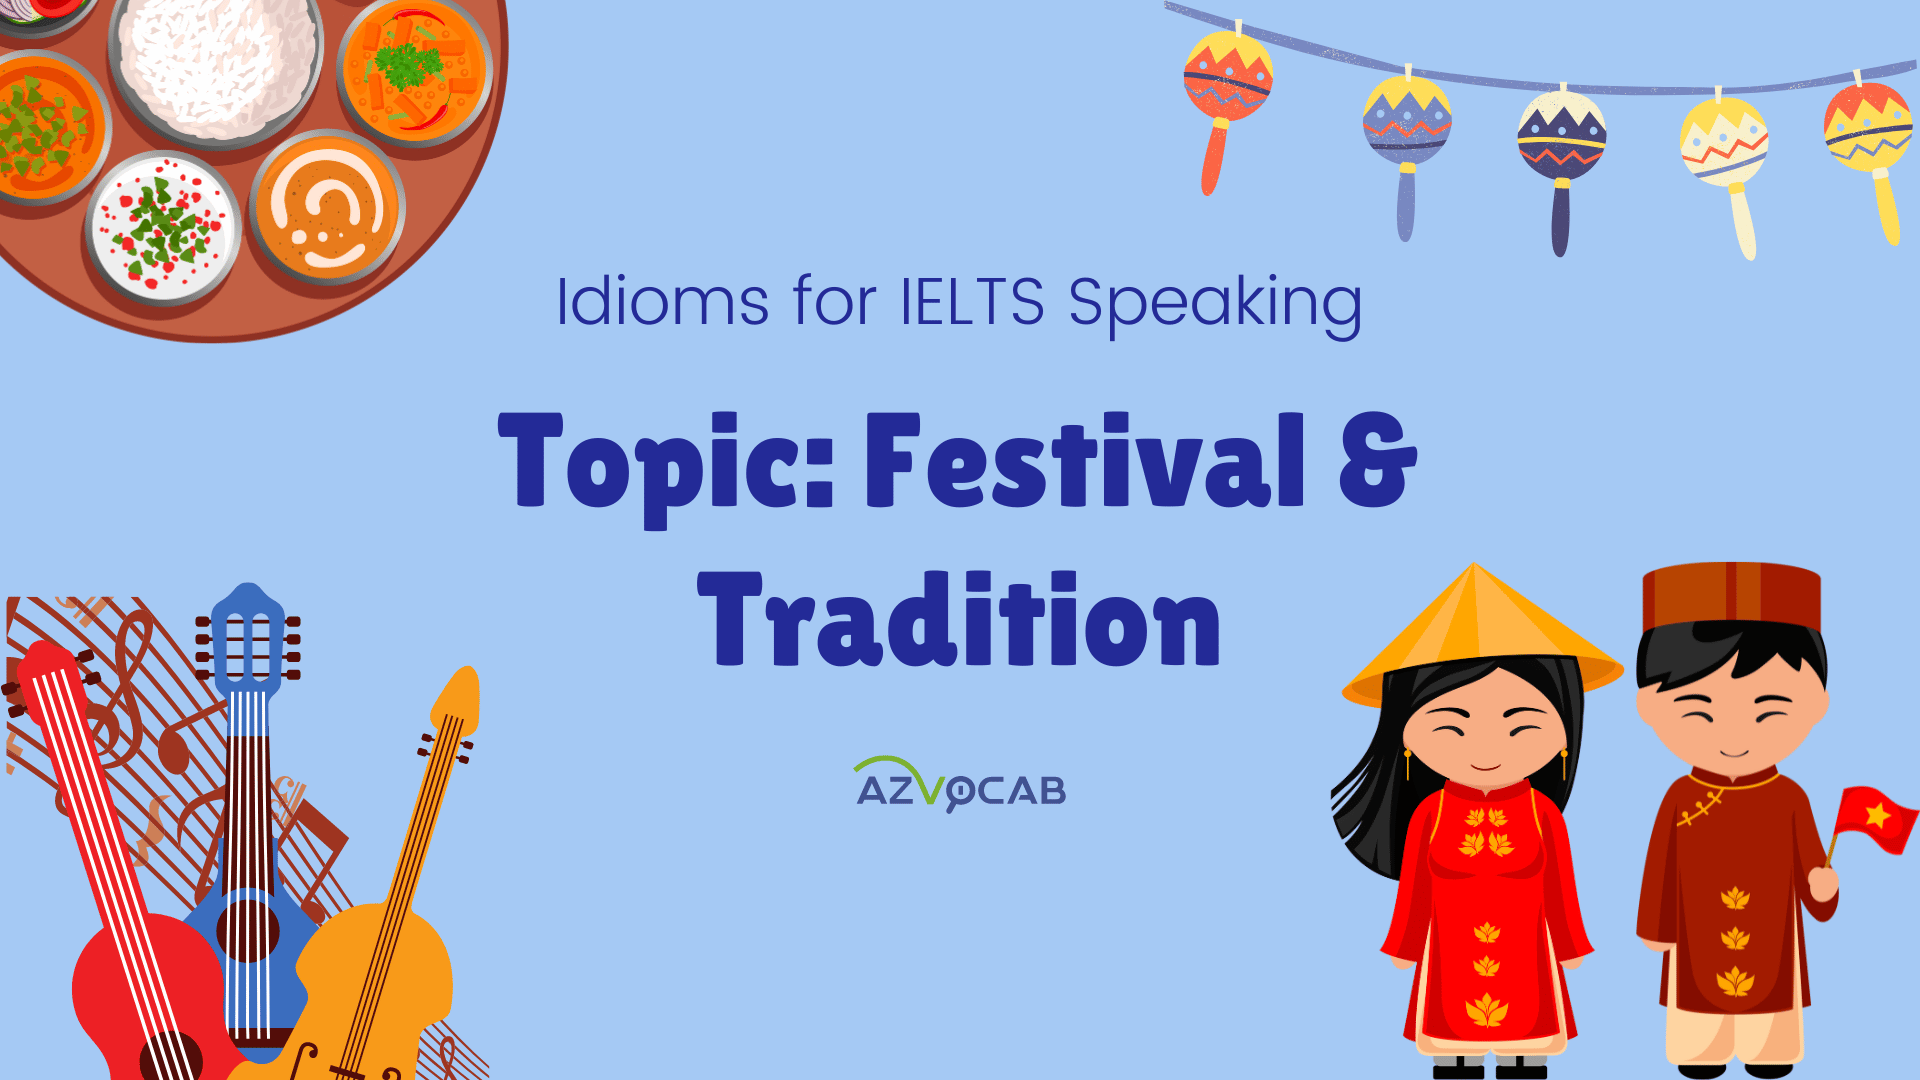 Idioms for IELTS Speaking Festival and Tradition